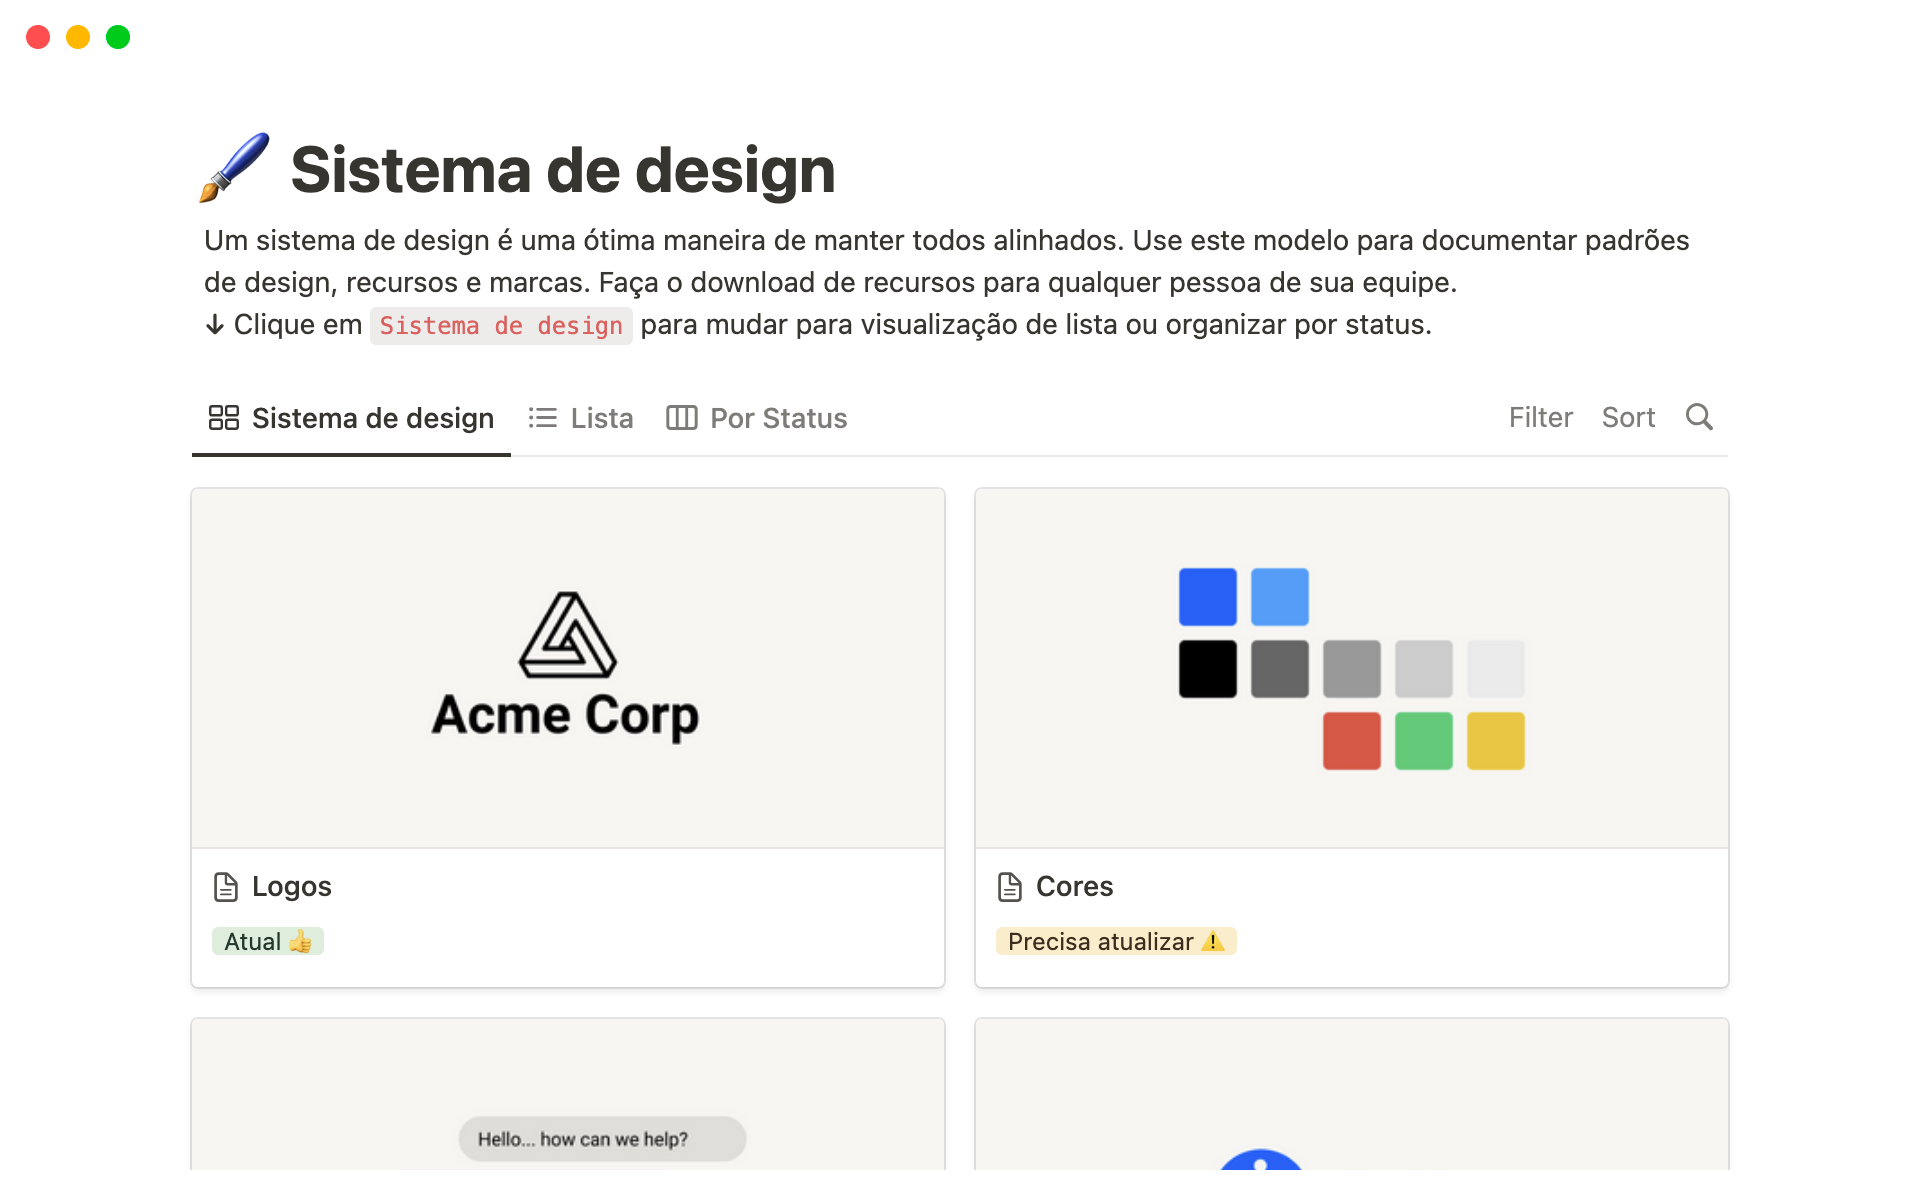 The desktop image for the Design system template